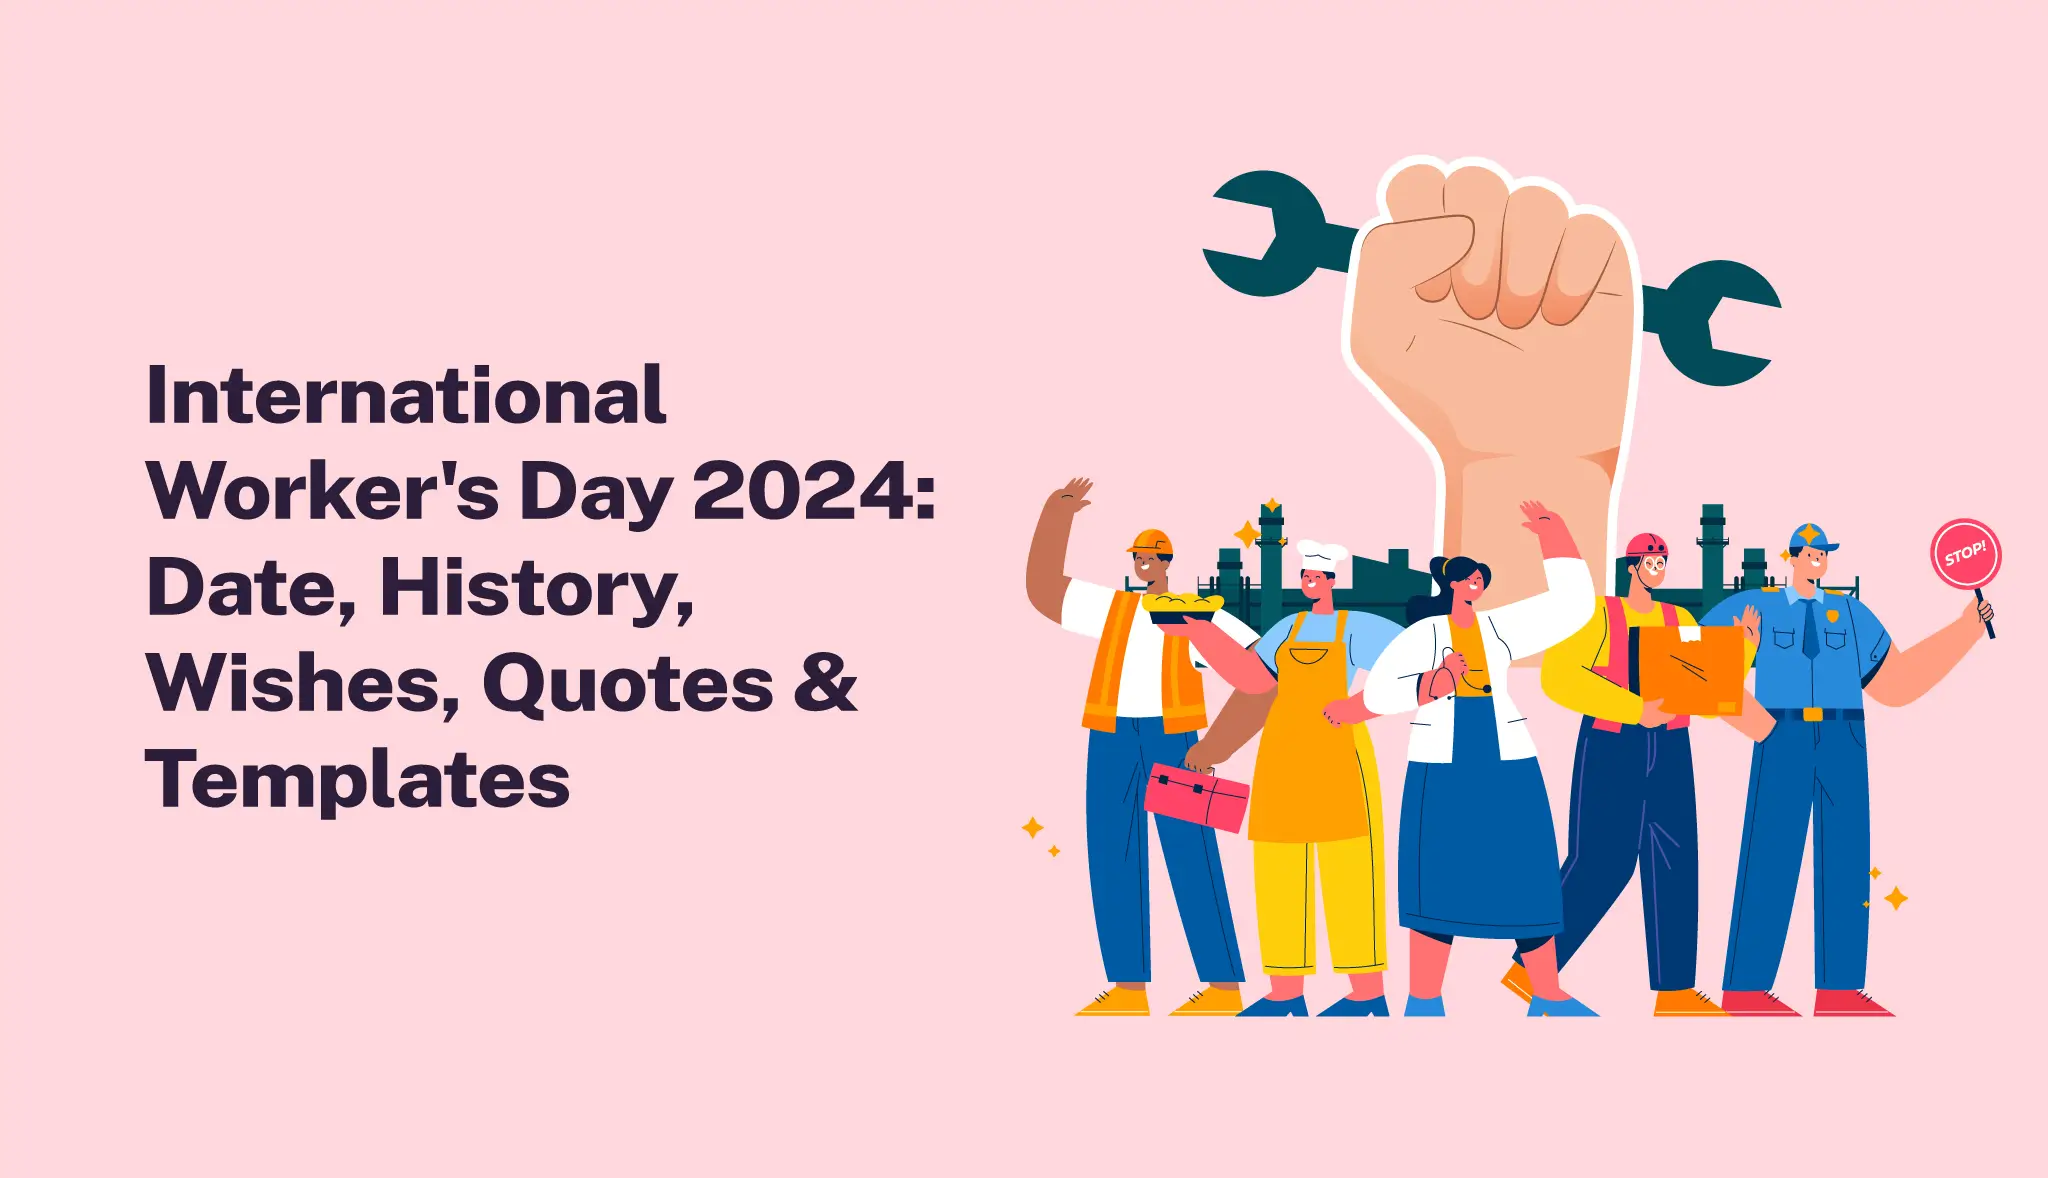 International Worker's Day 2024: Date, History, Wishes, Quotes & Templates - Postive